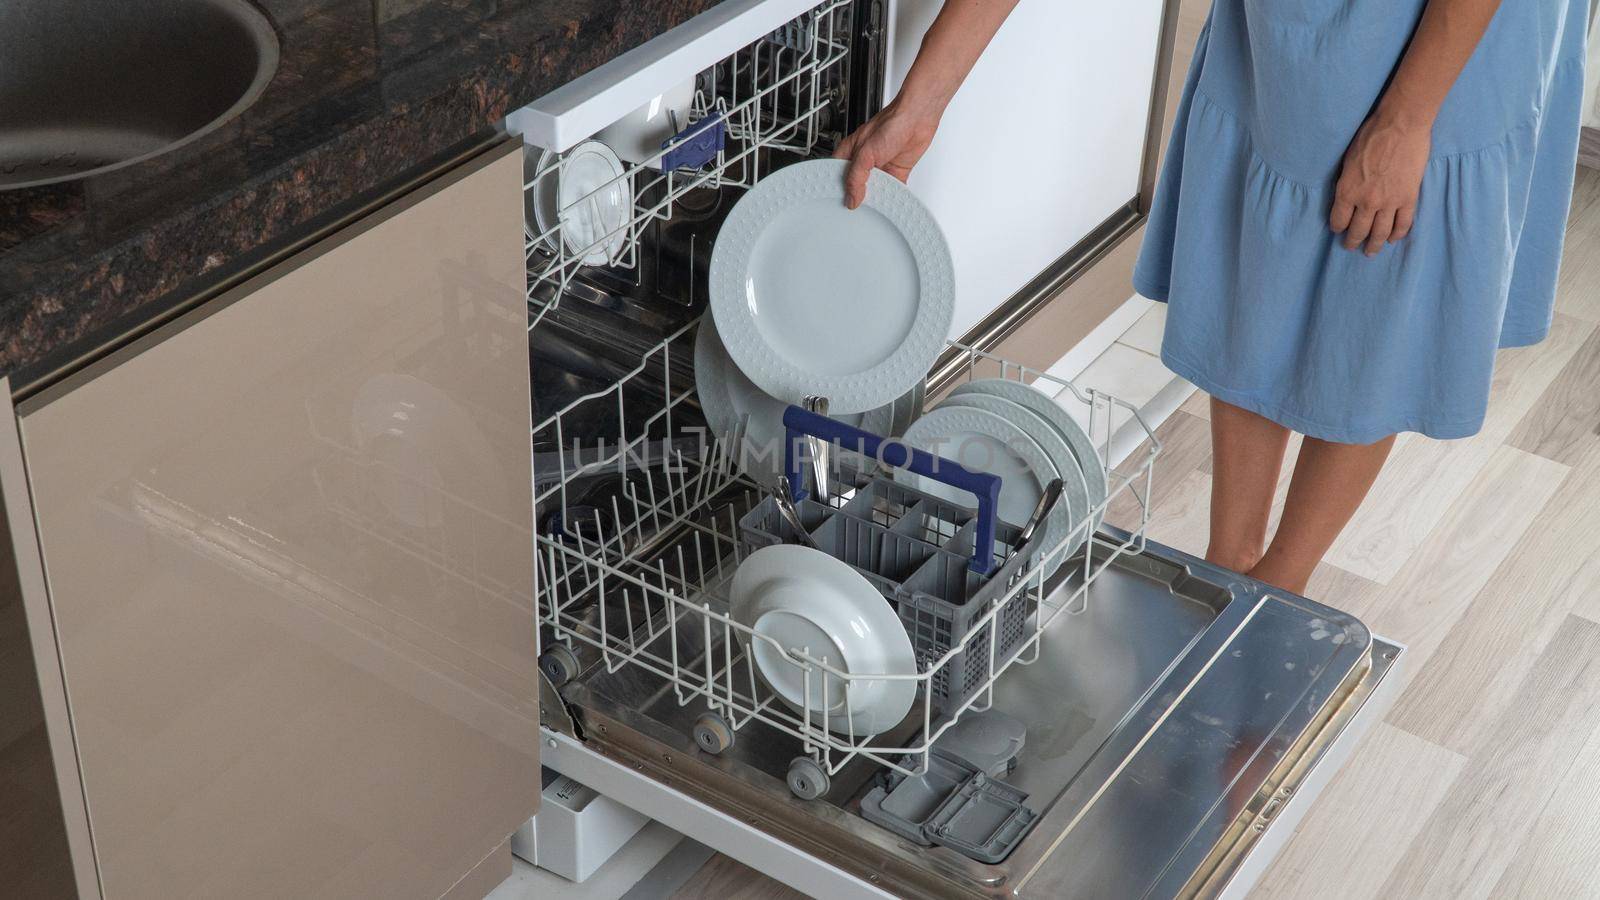 Housewife pulls clean plates out of dishwasher close-up